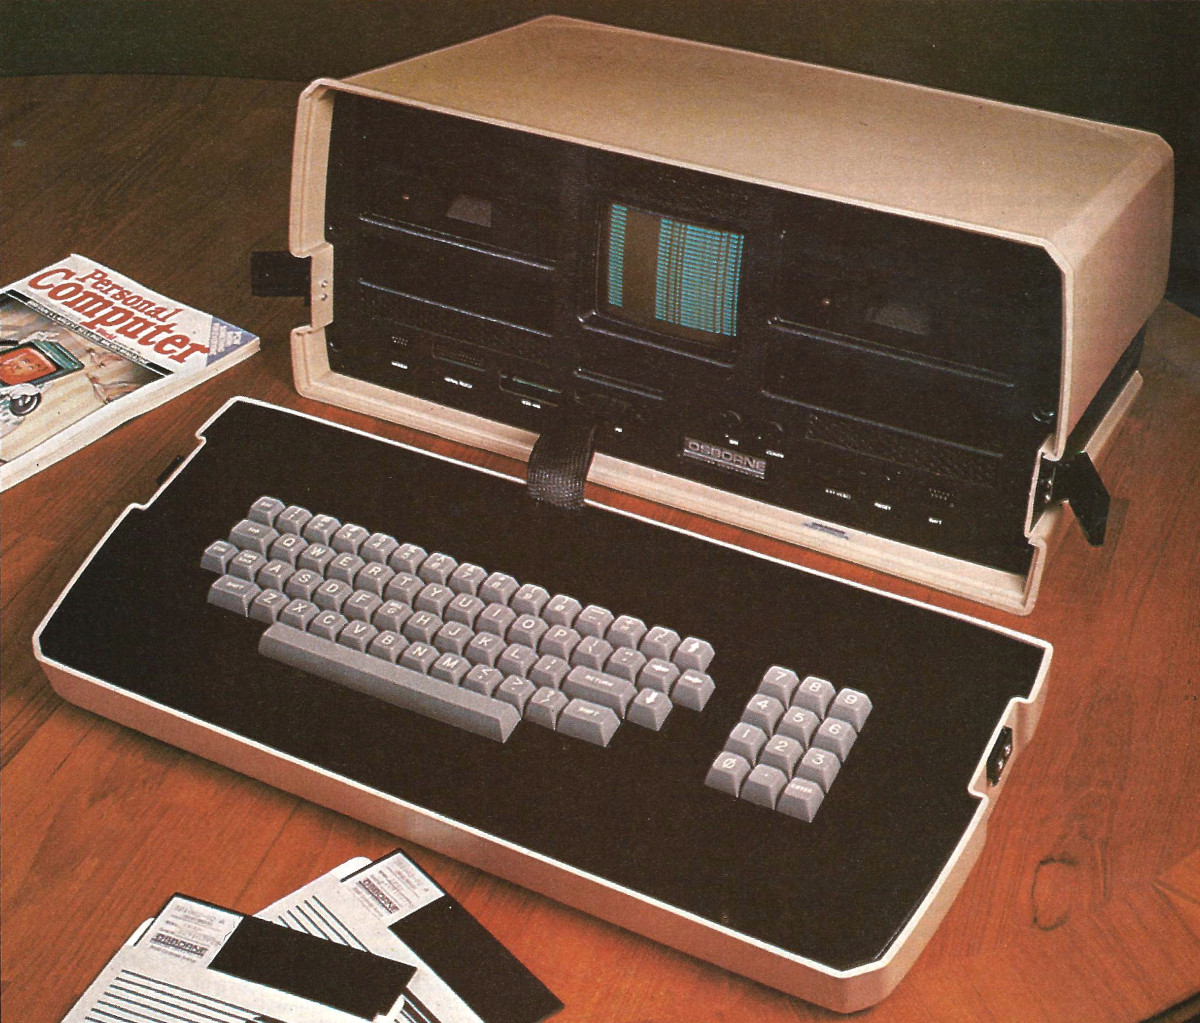 Adam Osborne's very own Osborne 1, borrowed by Personal Computer World for the night to do an evaluation whilst Osborne was in London. From Personal Computer World, November 1981